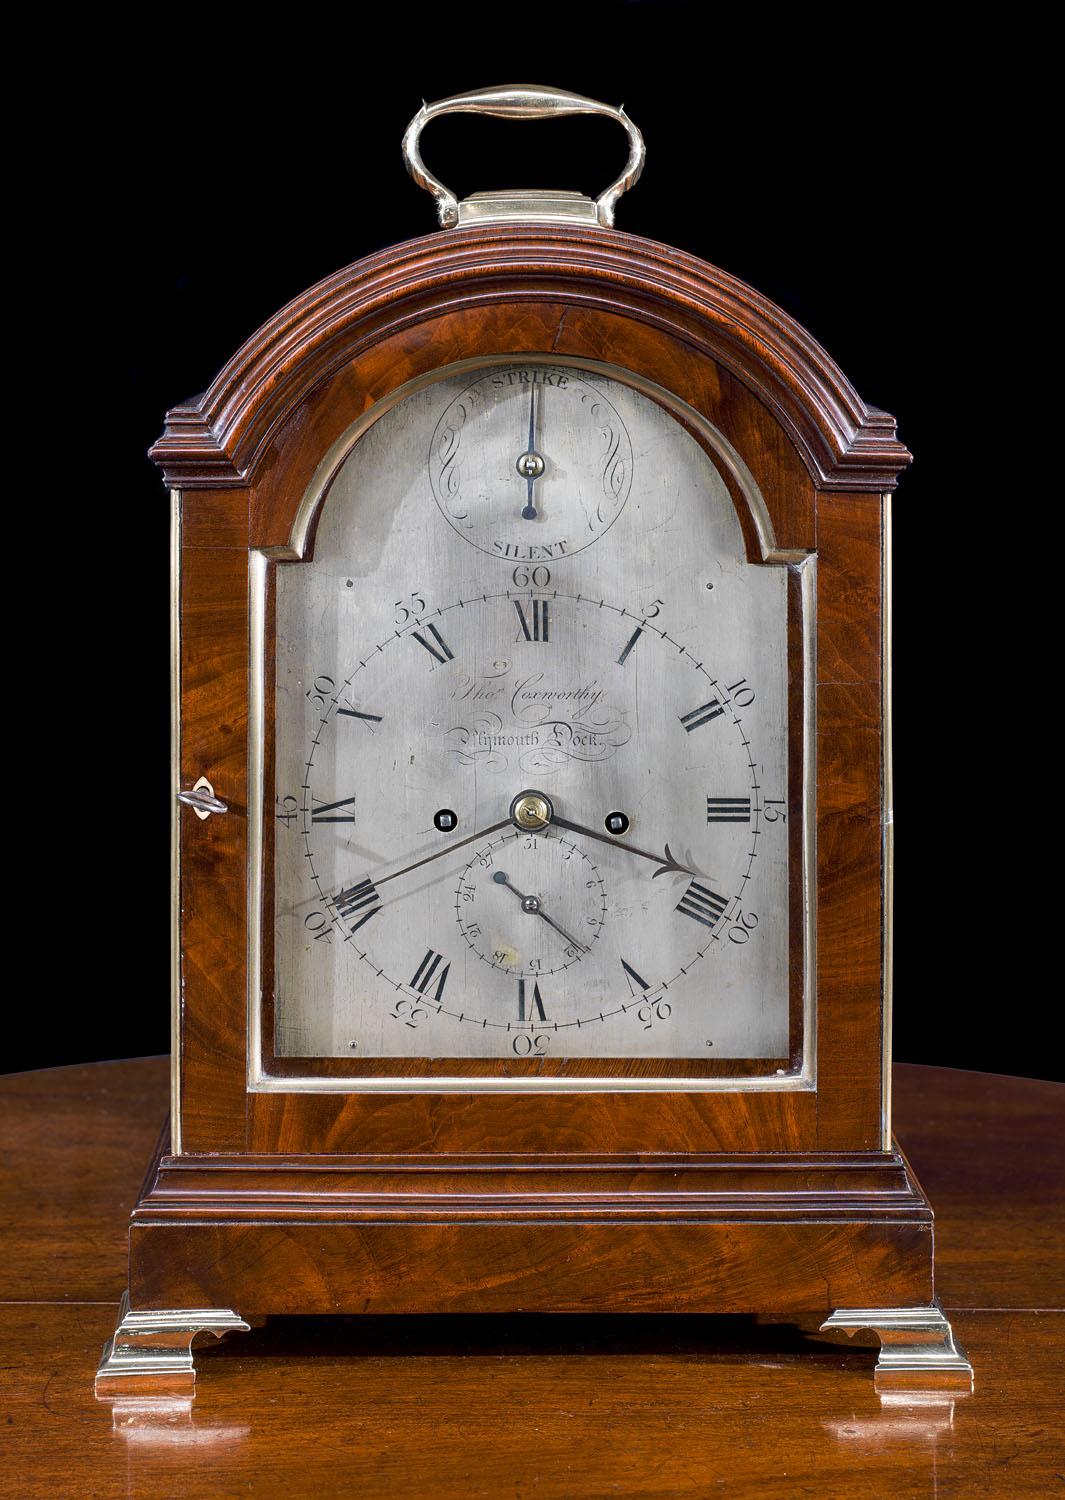 In this blog we explain how to identify antique clock makers' marks